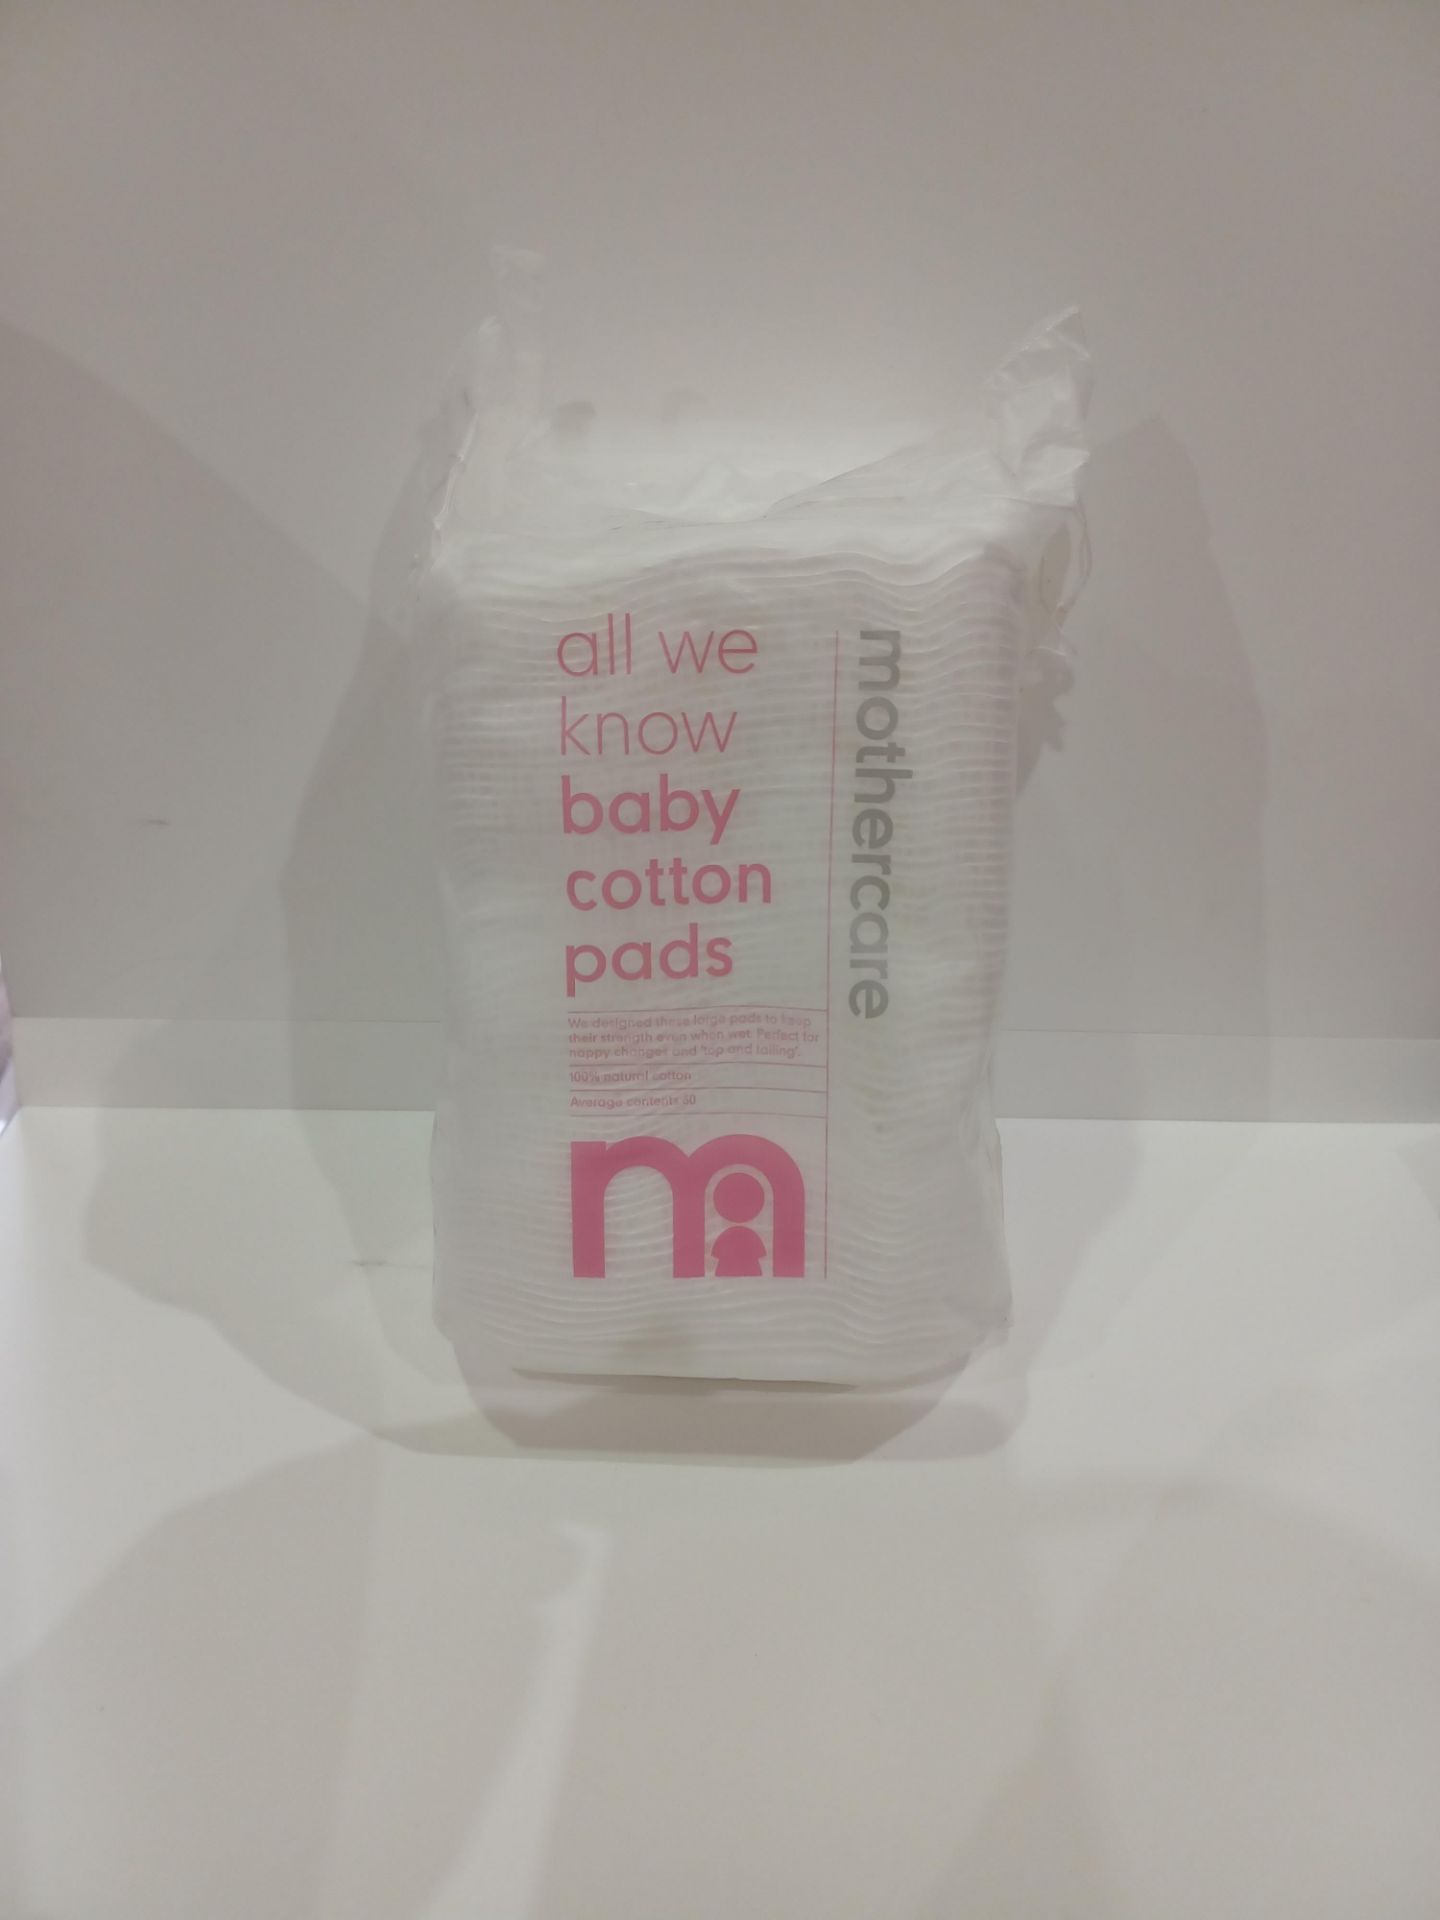 24 X BRAND NEW 'ALL WE KNOW' BABY COTTON PADS - R9